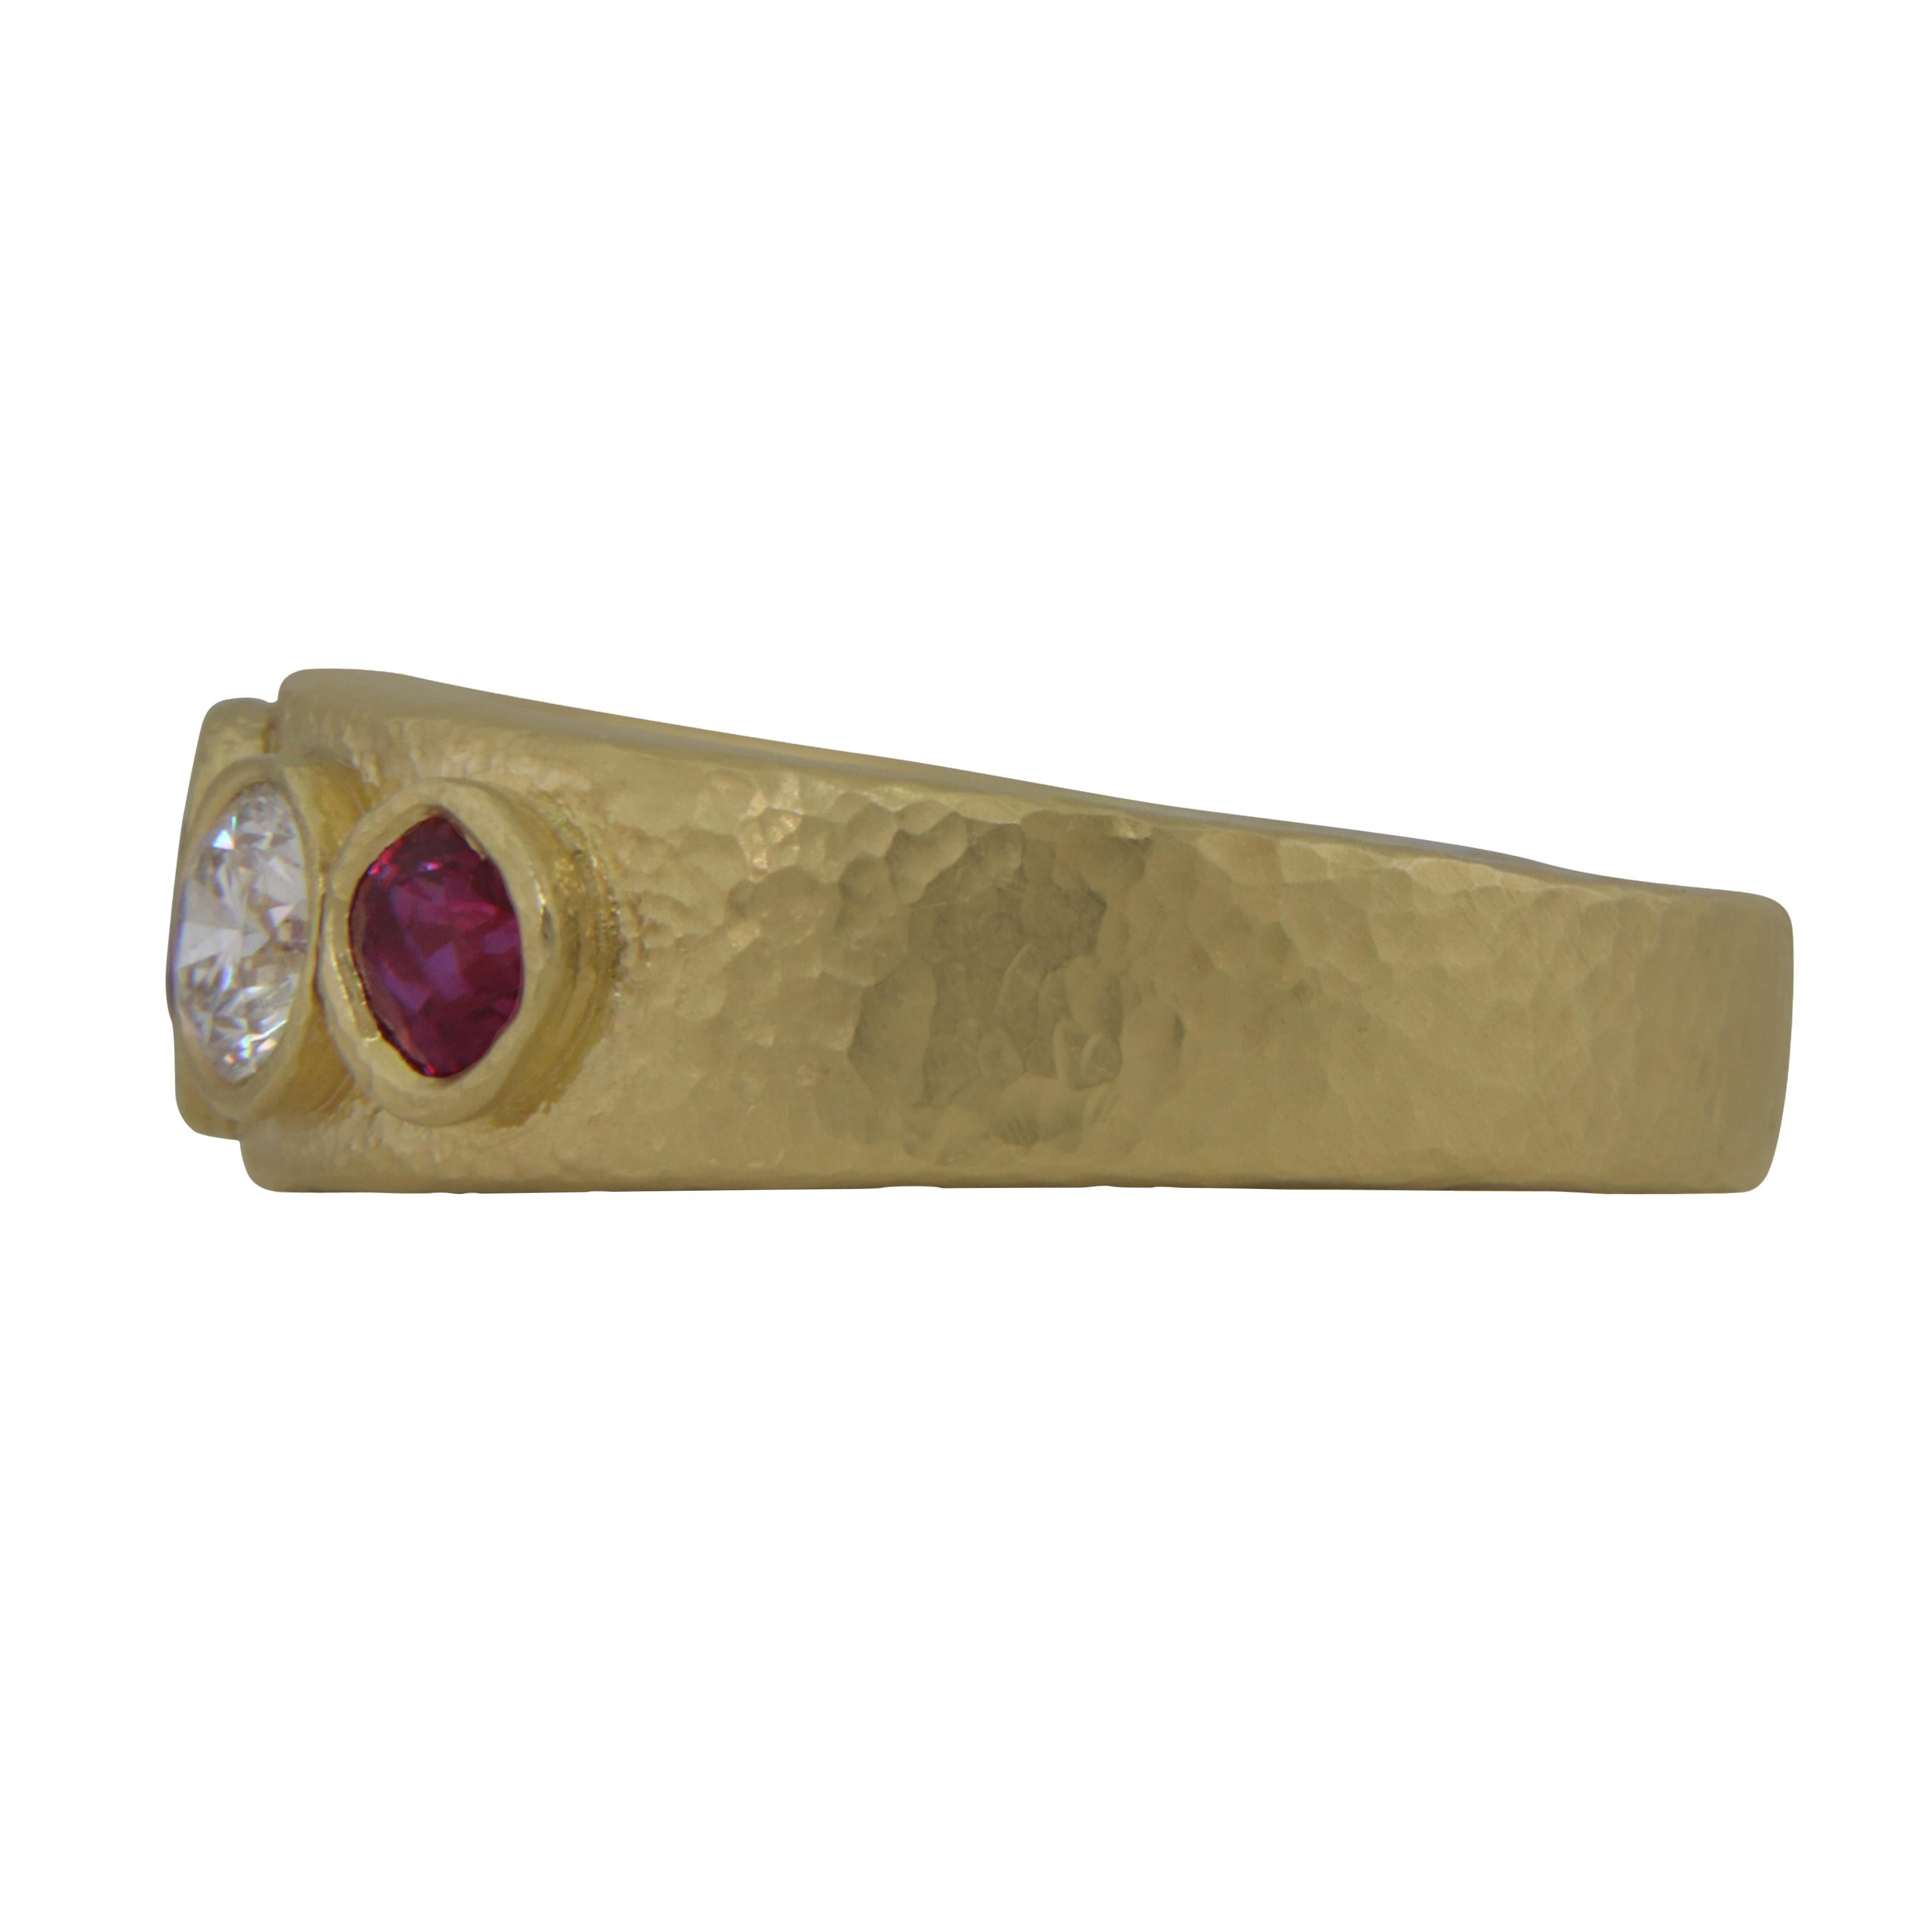 Featured is a hand crafted 18 karat yellow gold diamond & ruby ring with 2 round brilliant diamonds weighing 0.62 carats and 3 ruboie's weighing 1.20 carats 9.60 grams finished with a lightly hammered brushed texture size 6.50 USA 

- Size is